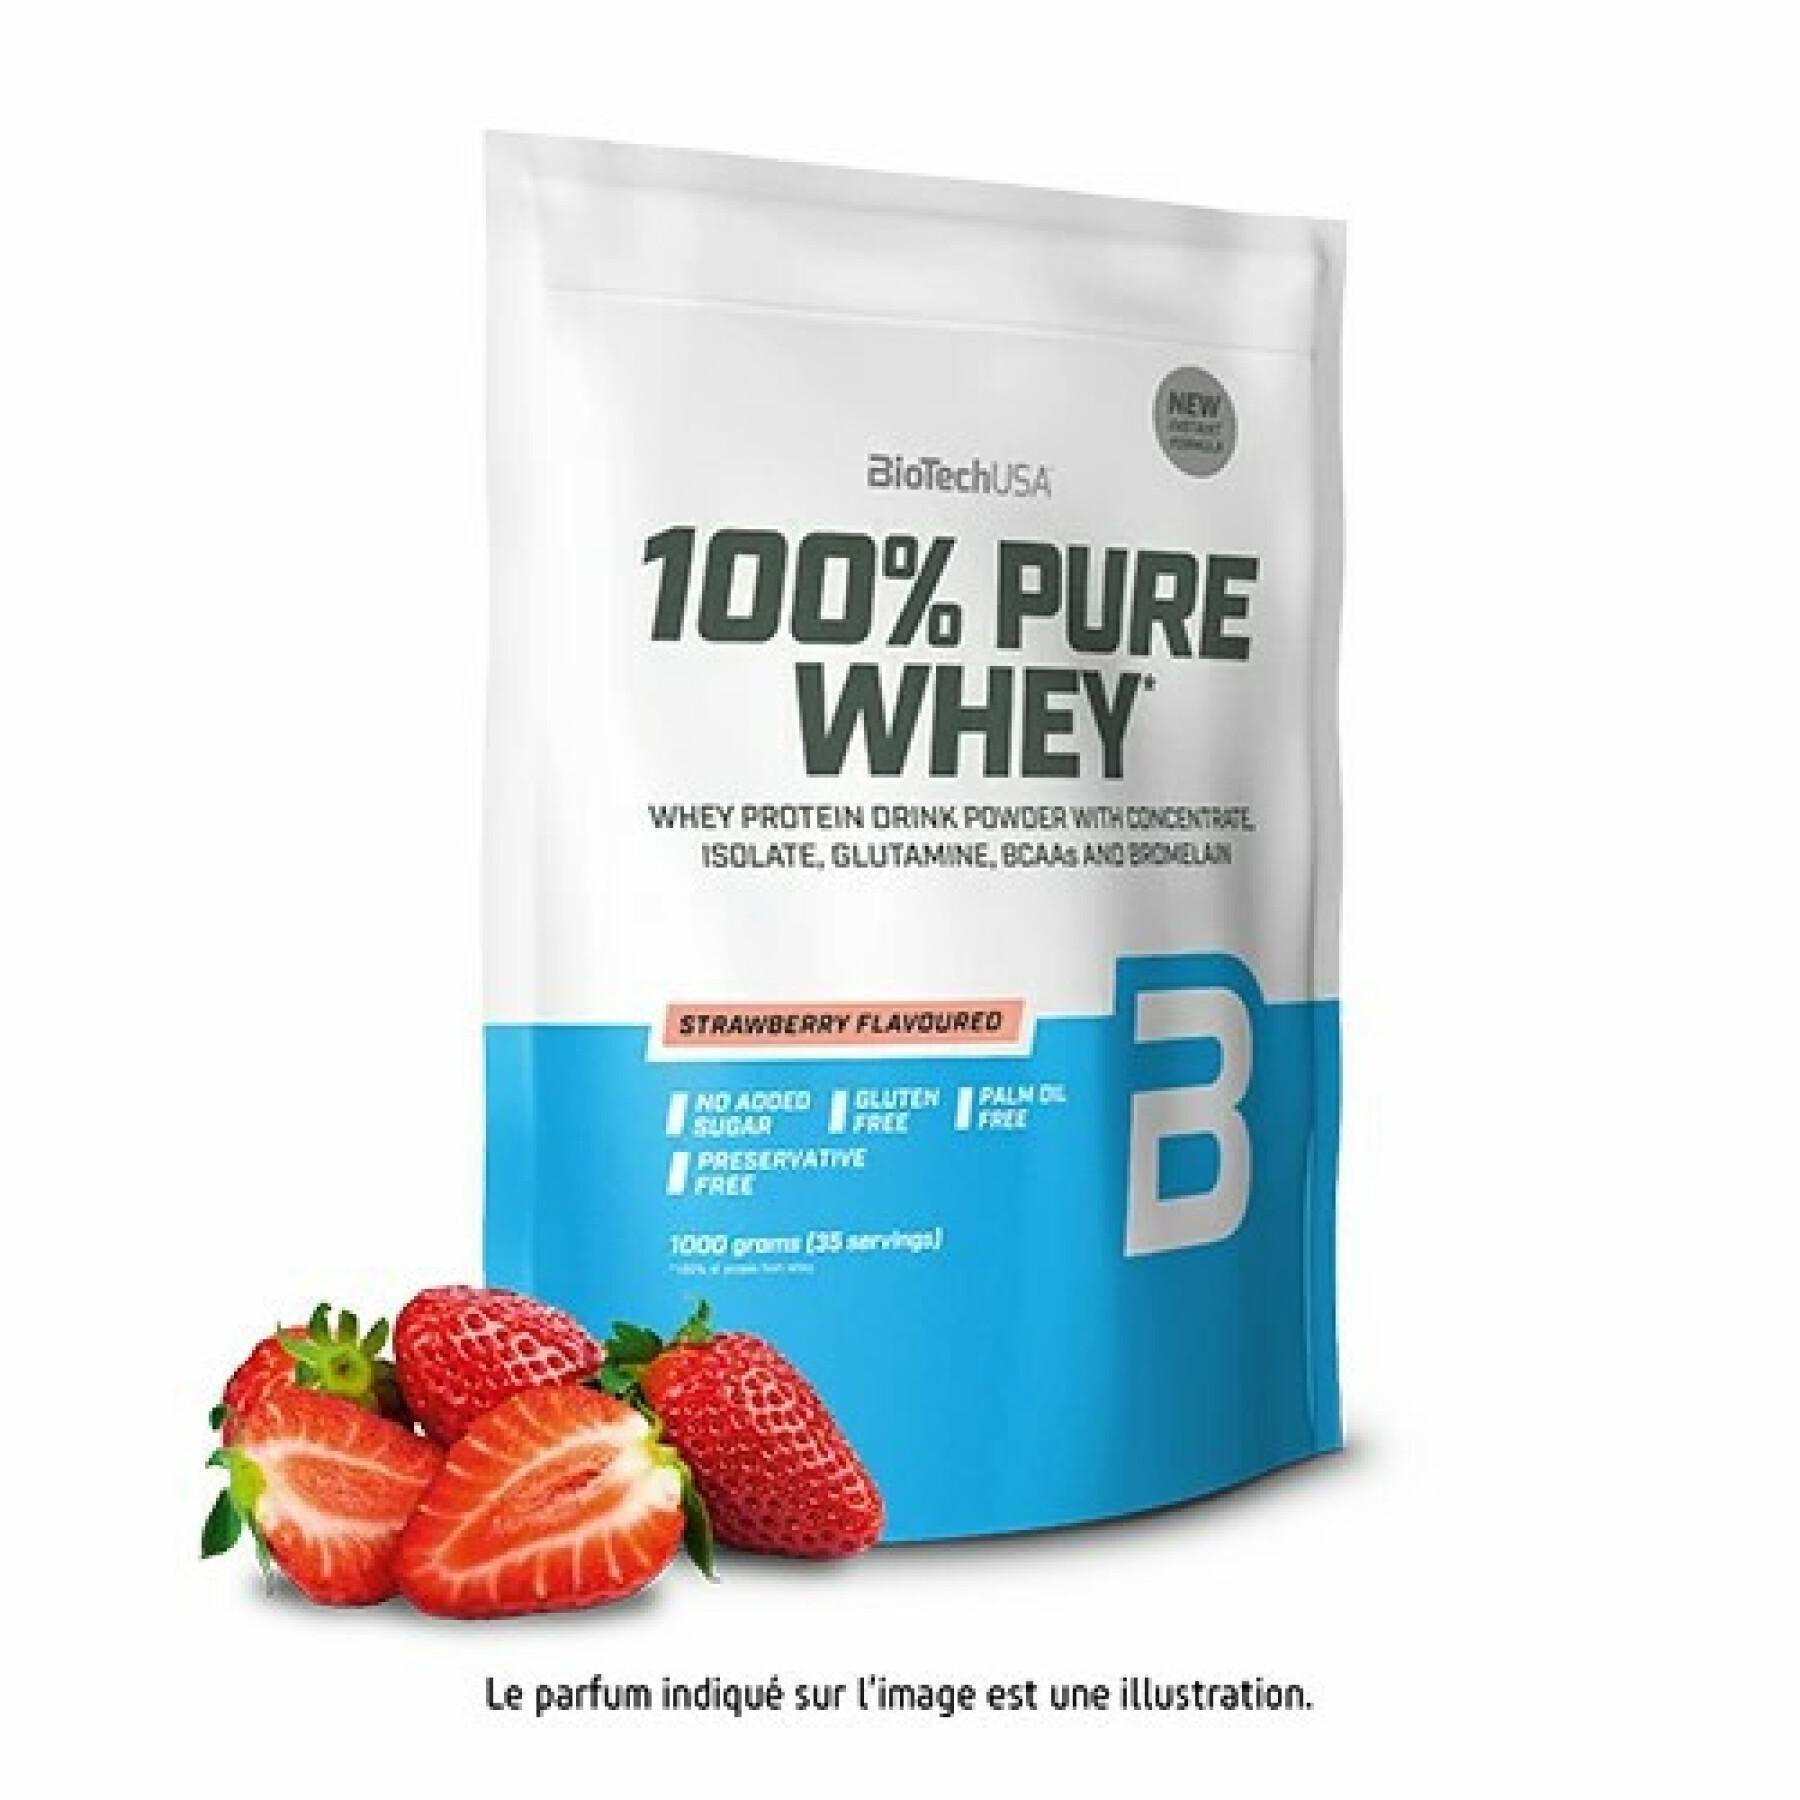 Lot of 10 bags of 100% pure whey protein Biotech USA - Fraise - 1kg